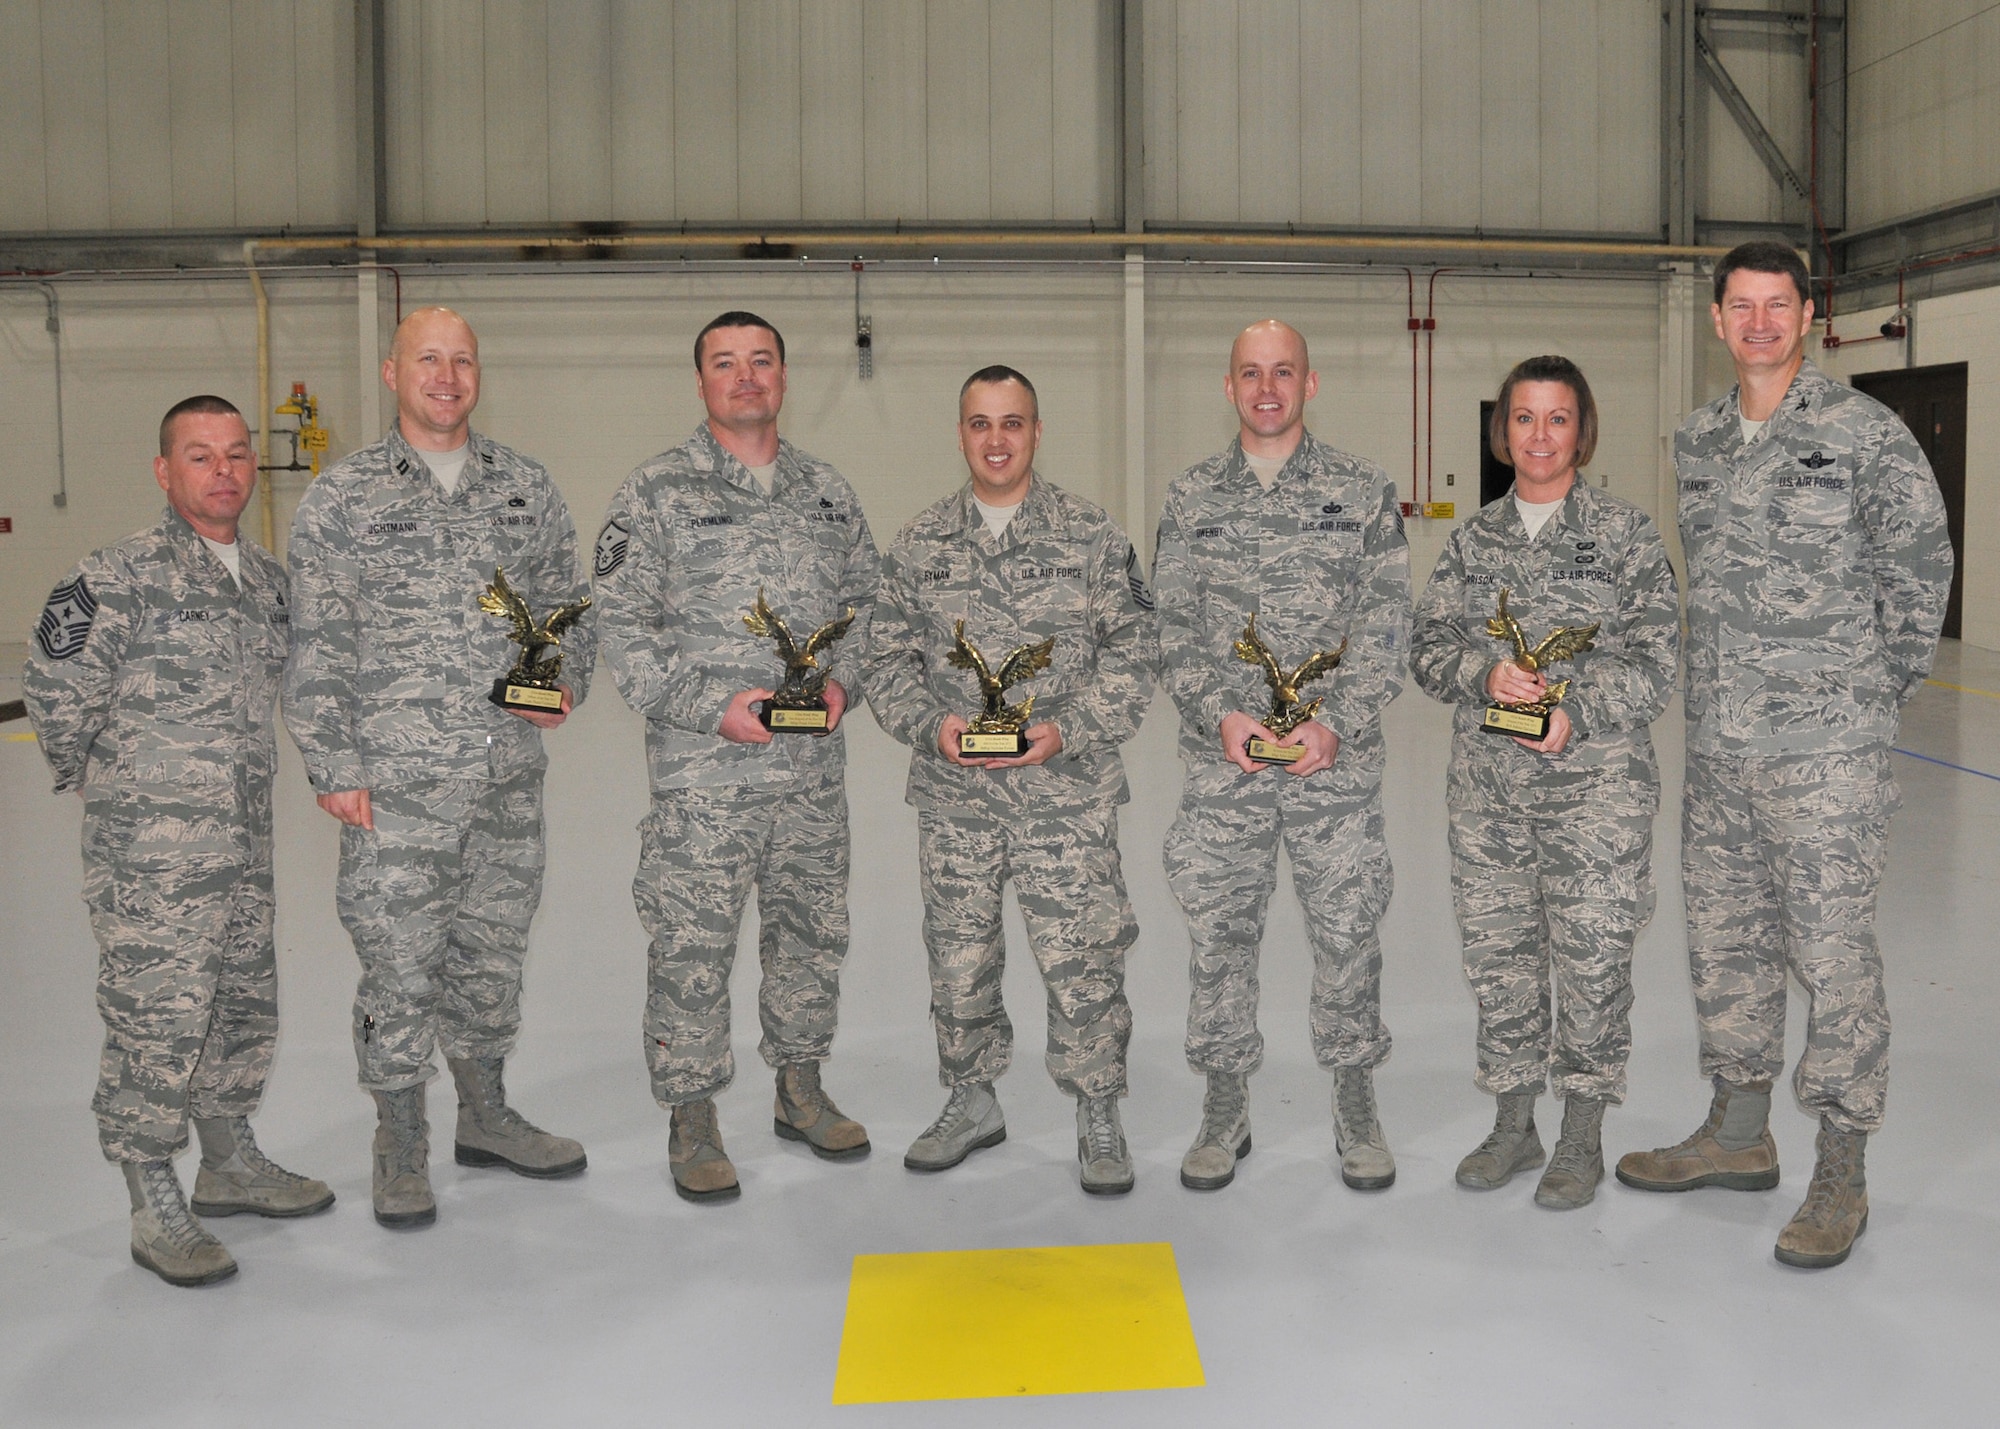 131st Bomb Wing commander Col Mike Francis and wing command Chief Master Sgt. Paul Carney stand with the 131st Airman of the Year winners.  Pictured (center l to r):  Capt. Daniel Uchtmann, Master Sgt. Frank Pliemling, Senior Master Sgt. Nicholas Eyman, Staff Sgt. Tyler Owenby. Senior Airman Ashlea Garrison  (U.S. Air National Guard photo by Senior Master Sgt. Mary-Dale Amison)